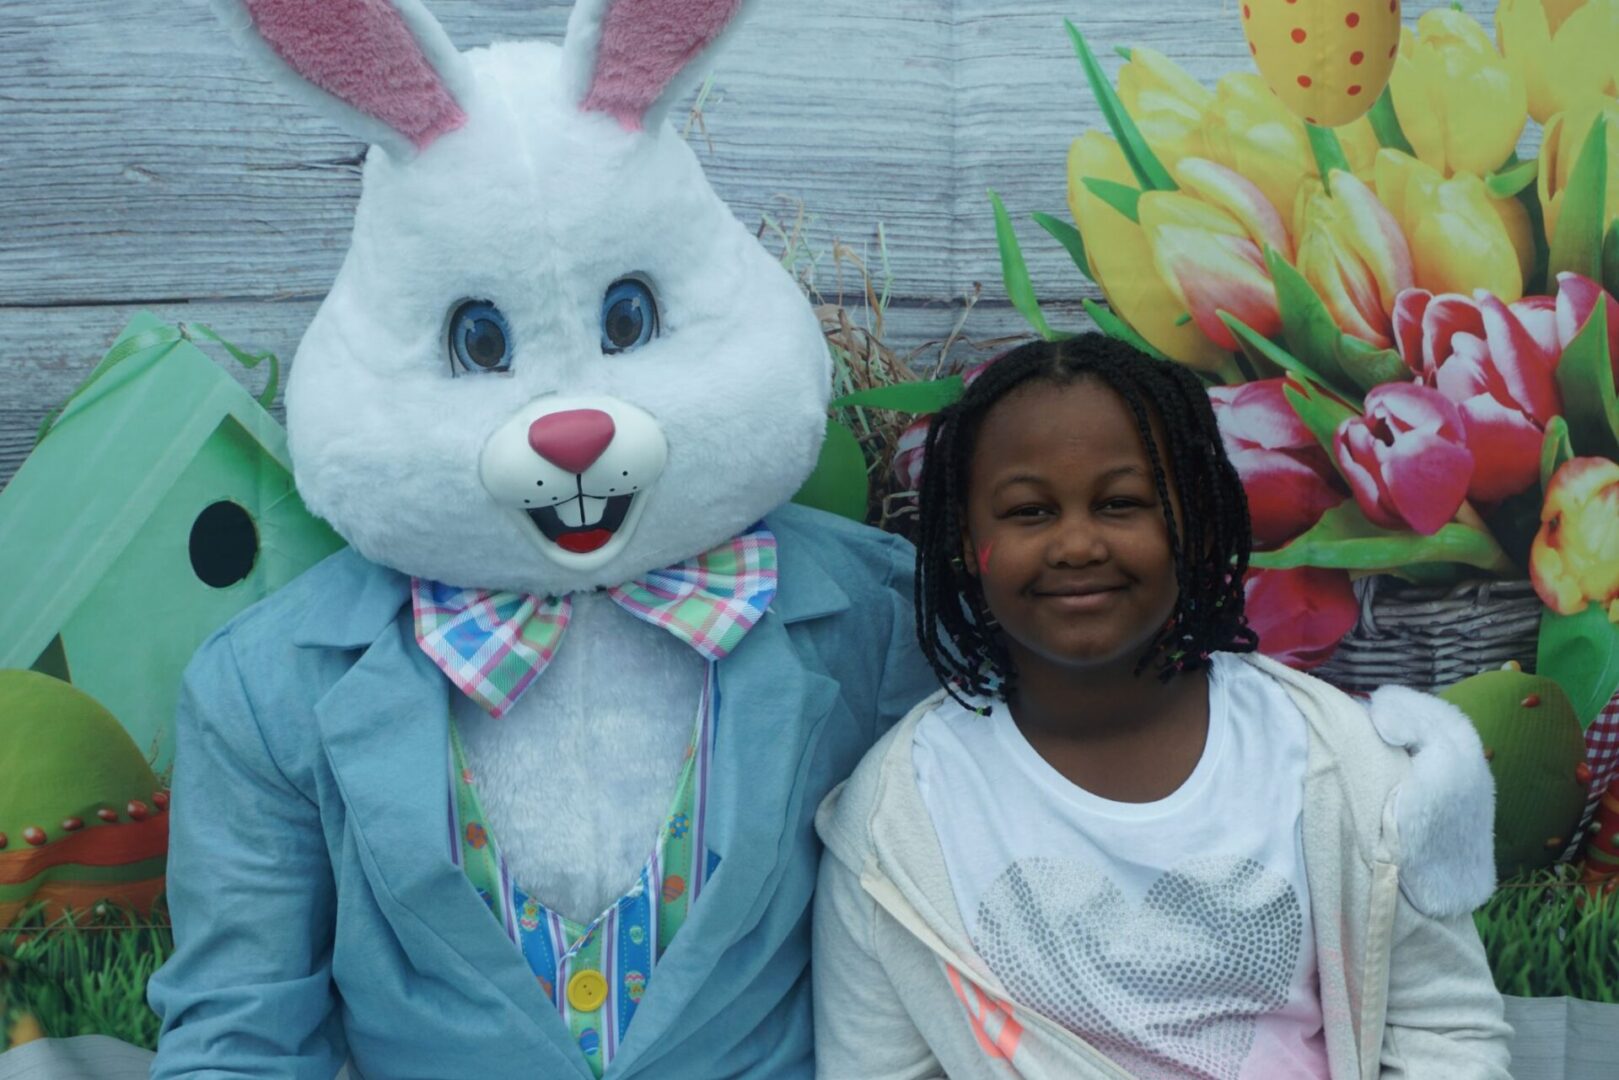 The bunny mascot with his arm around a girl in a thin jacket